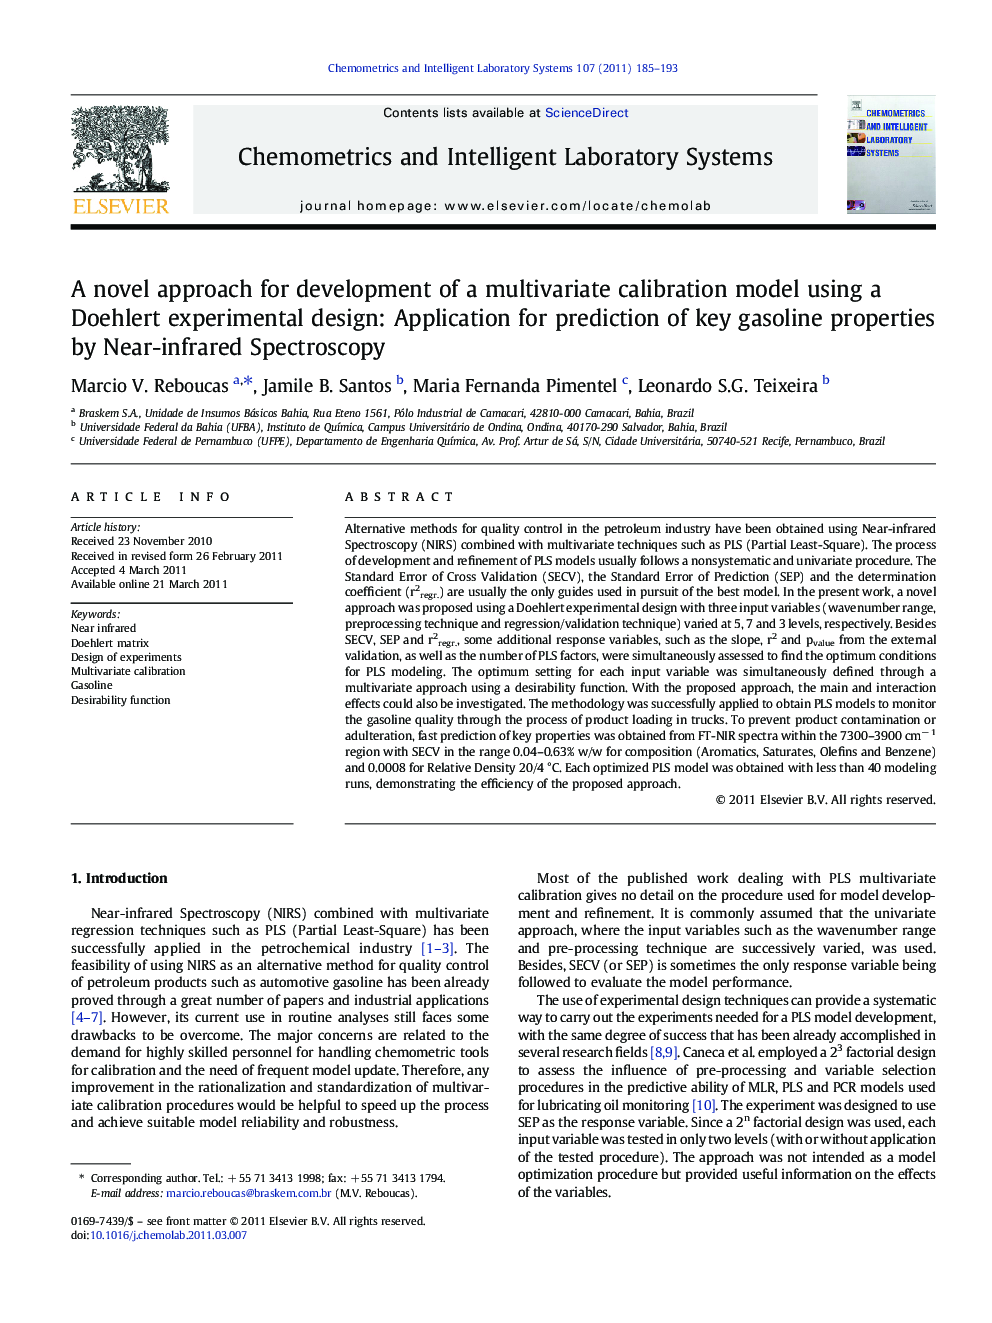 A novel approach for development of a multivariate calibration model using a Doehlert experimental design: Application for prediction of key gasoline properties by Near-infrared Spectroscopy